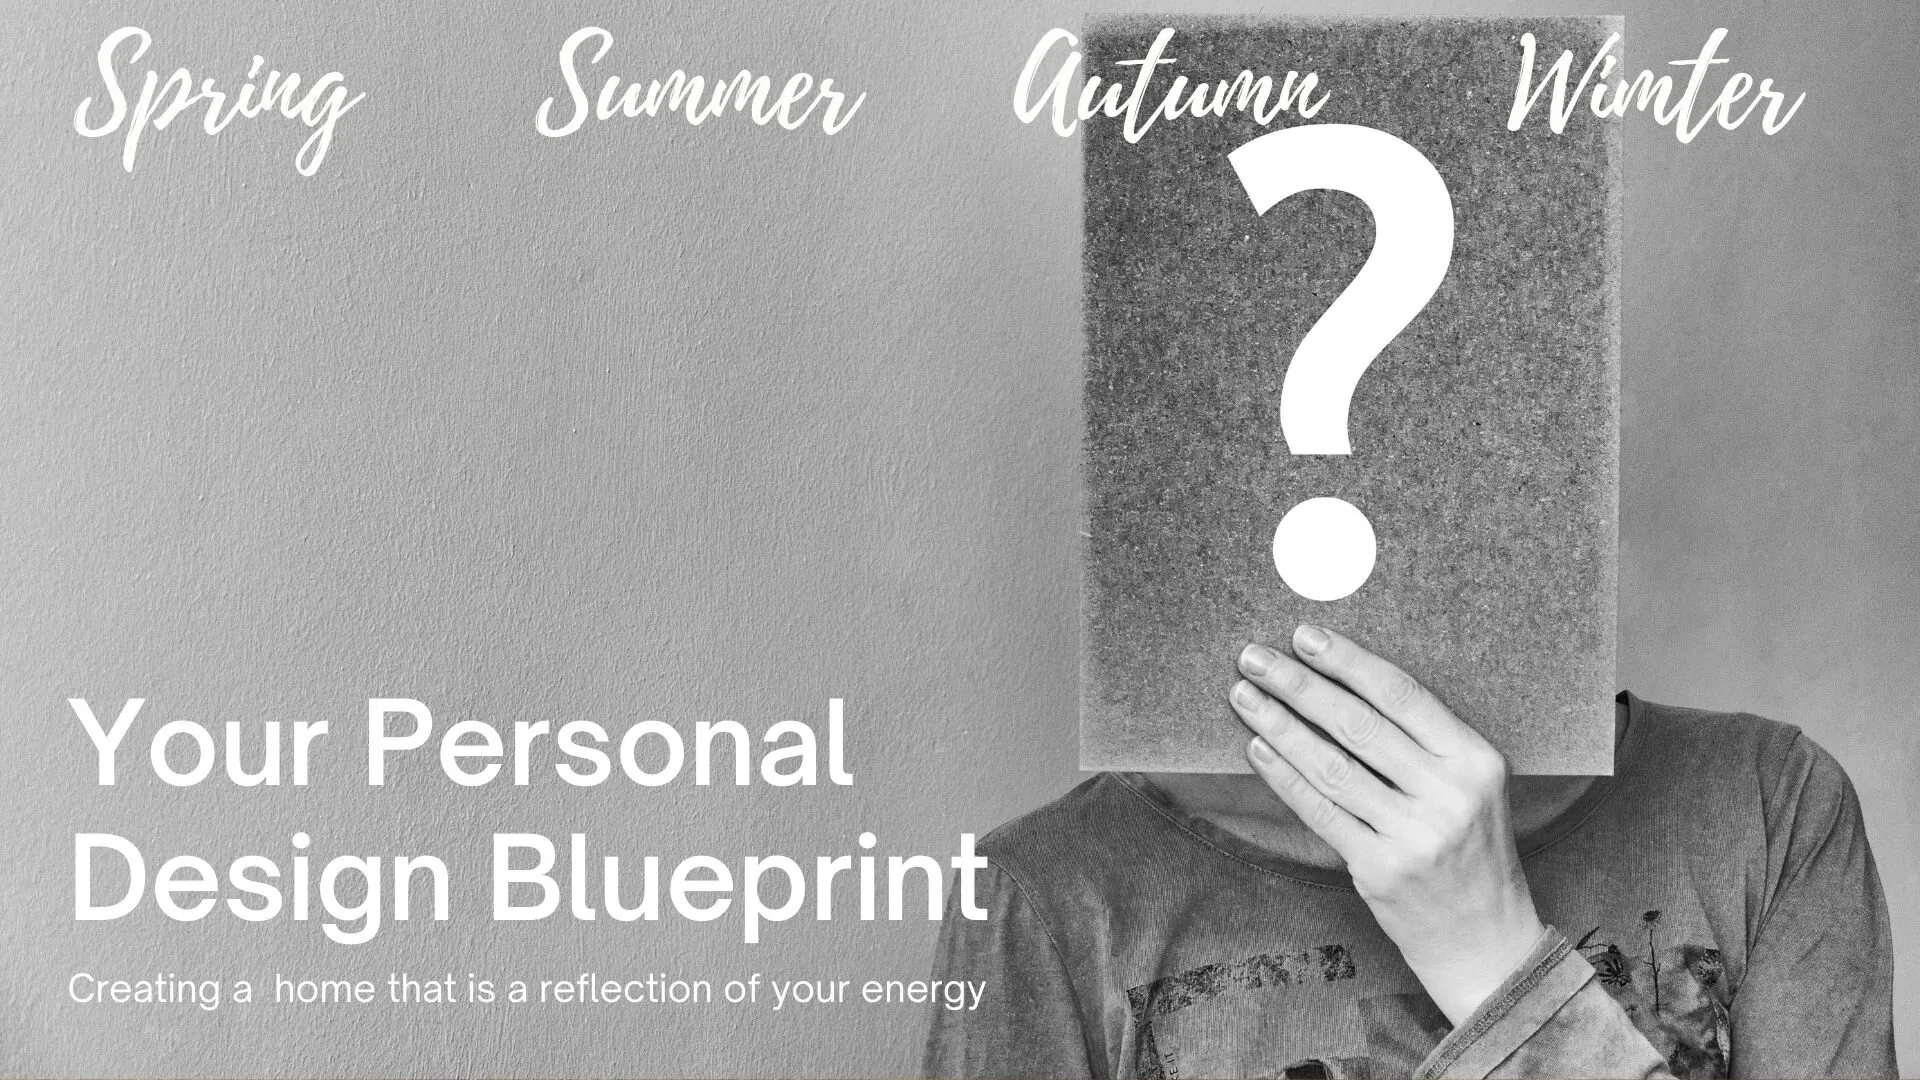 Discover your Personal Design Blueprint